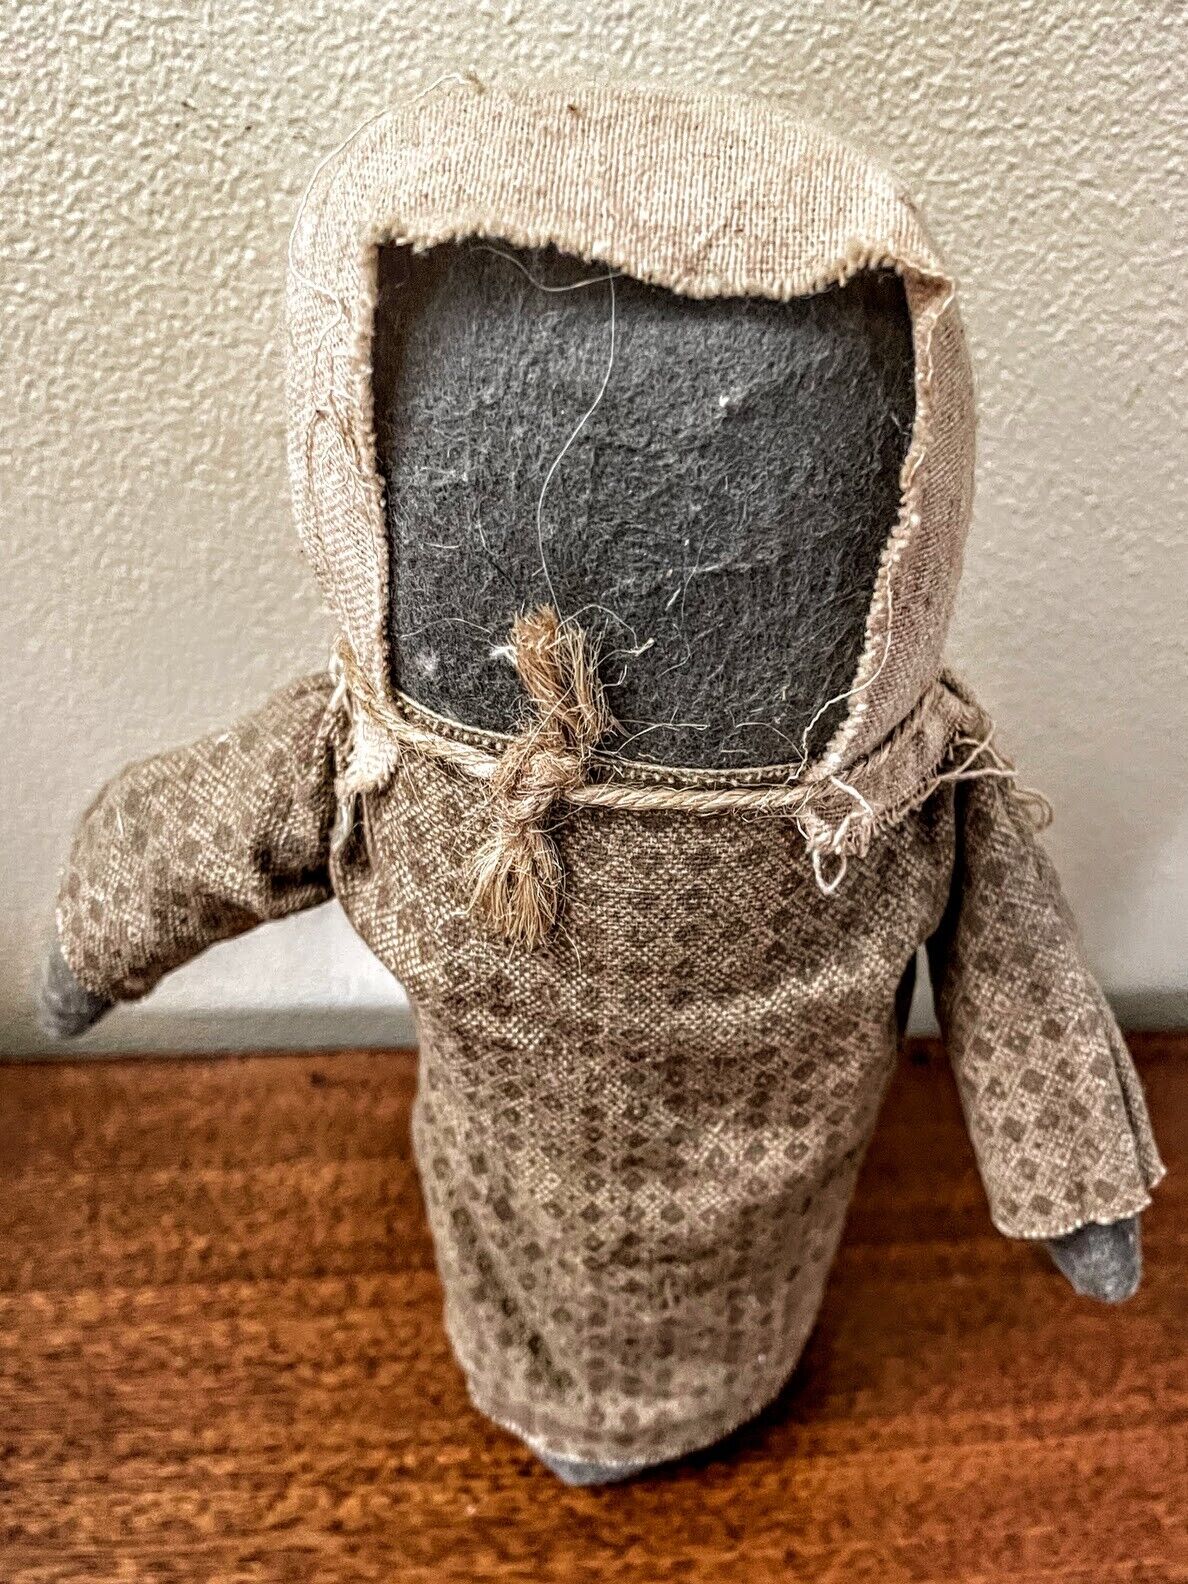 Primitive Farmhouse 8&quot; Amish Stump Doll Handcrafted - The Primitive Pineapple Collection